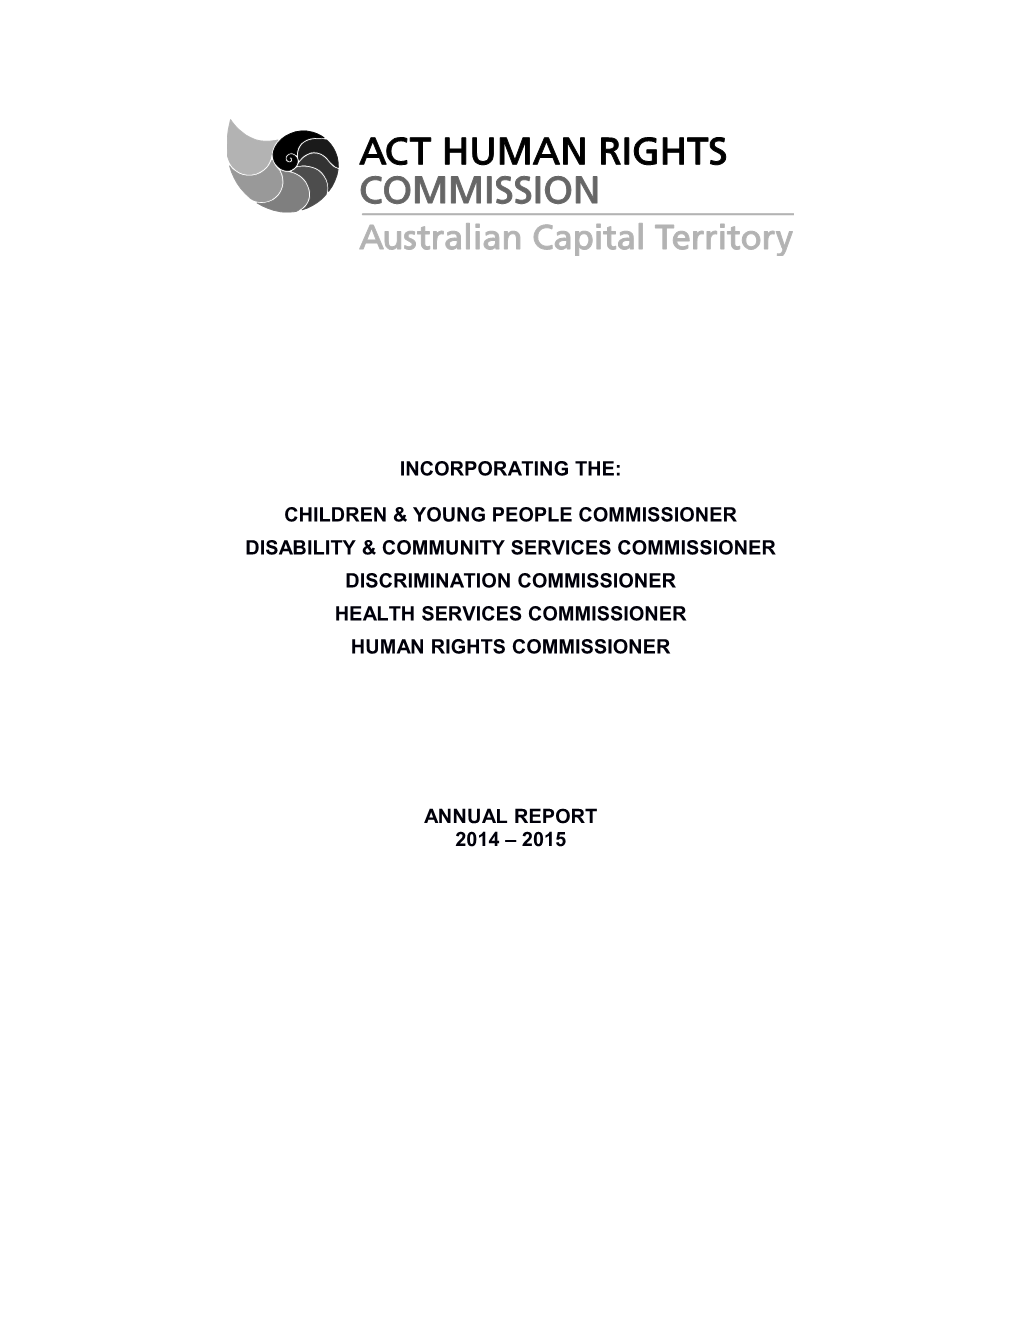 2012/13 Annual Report of the Human Rights Commission